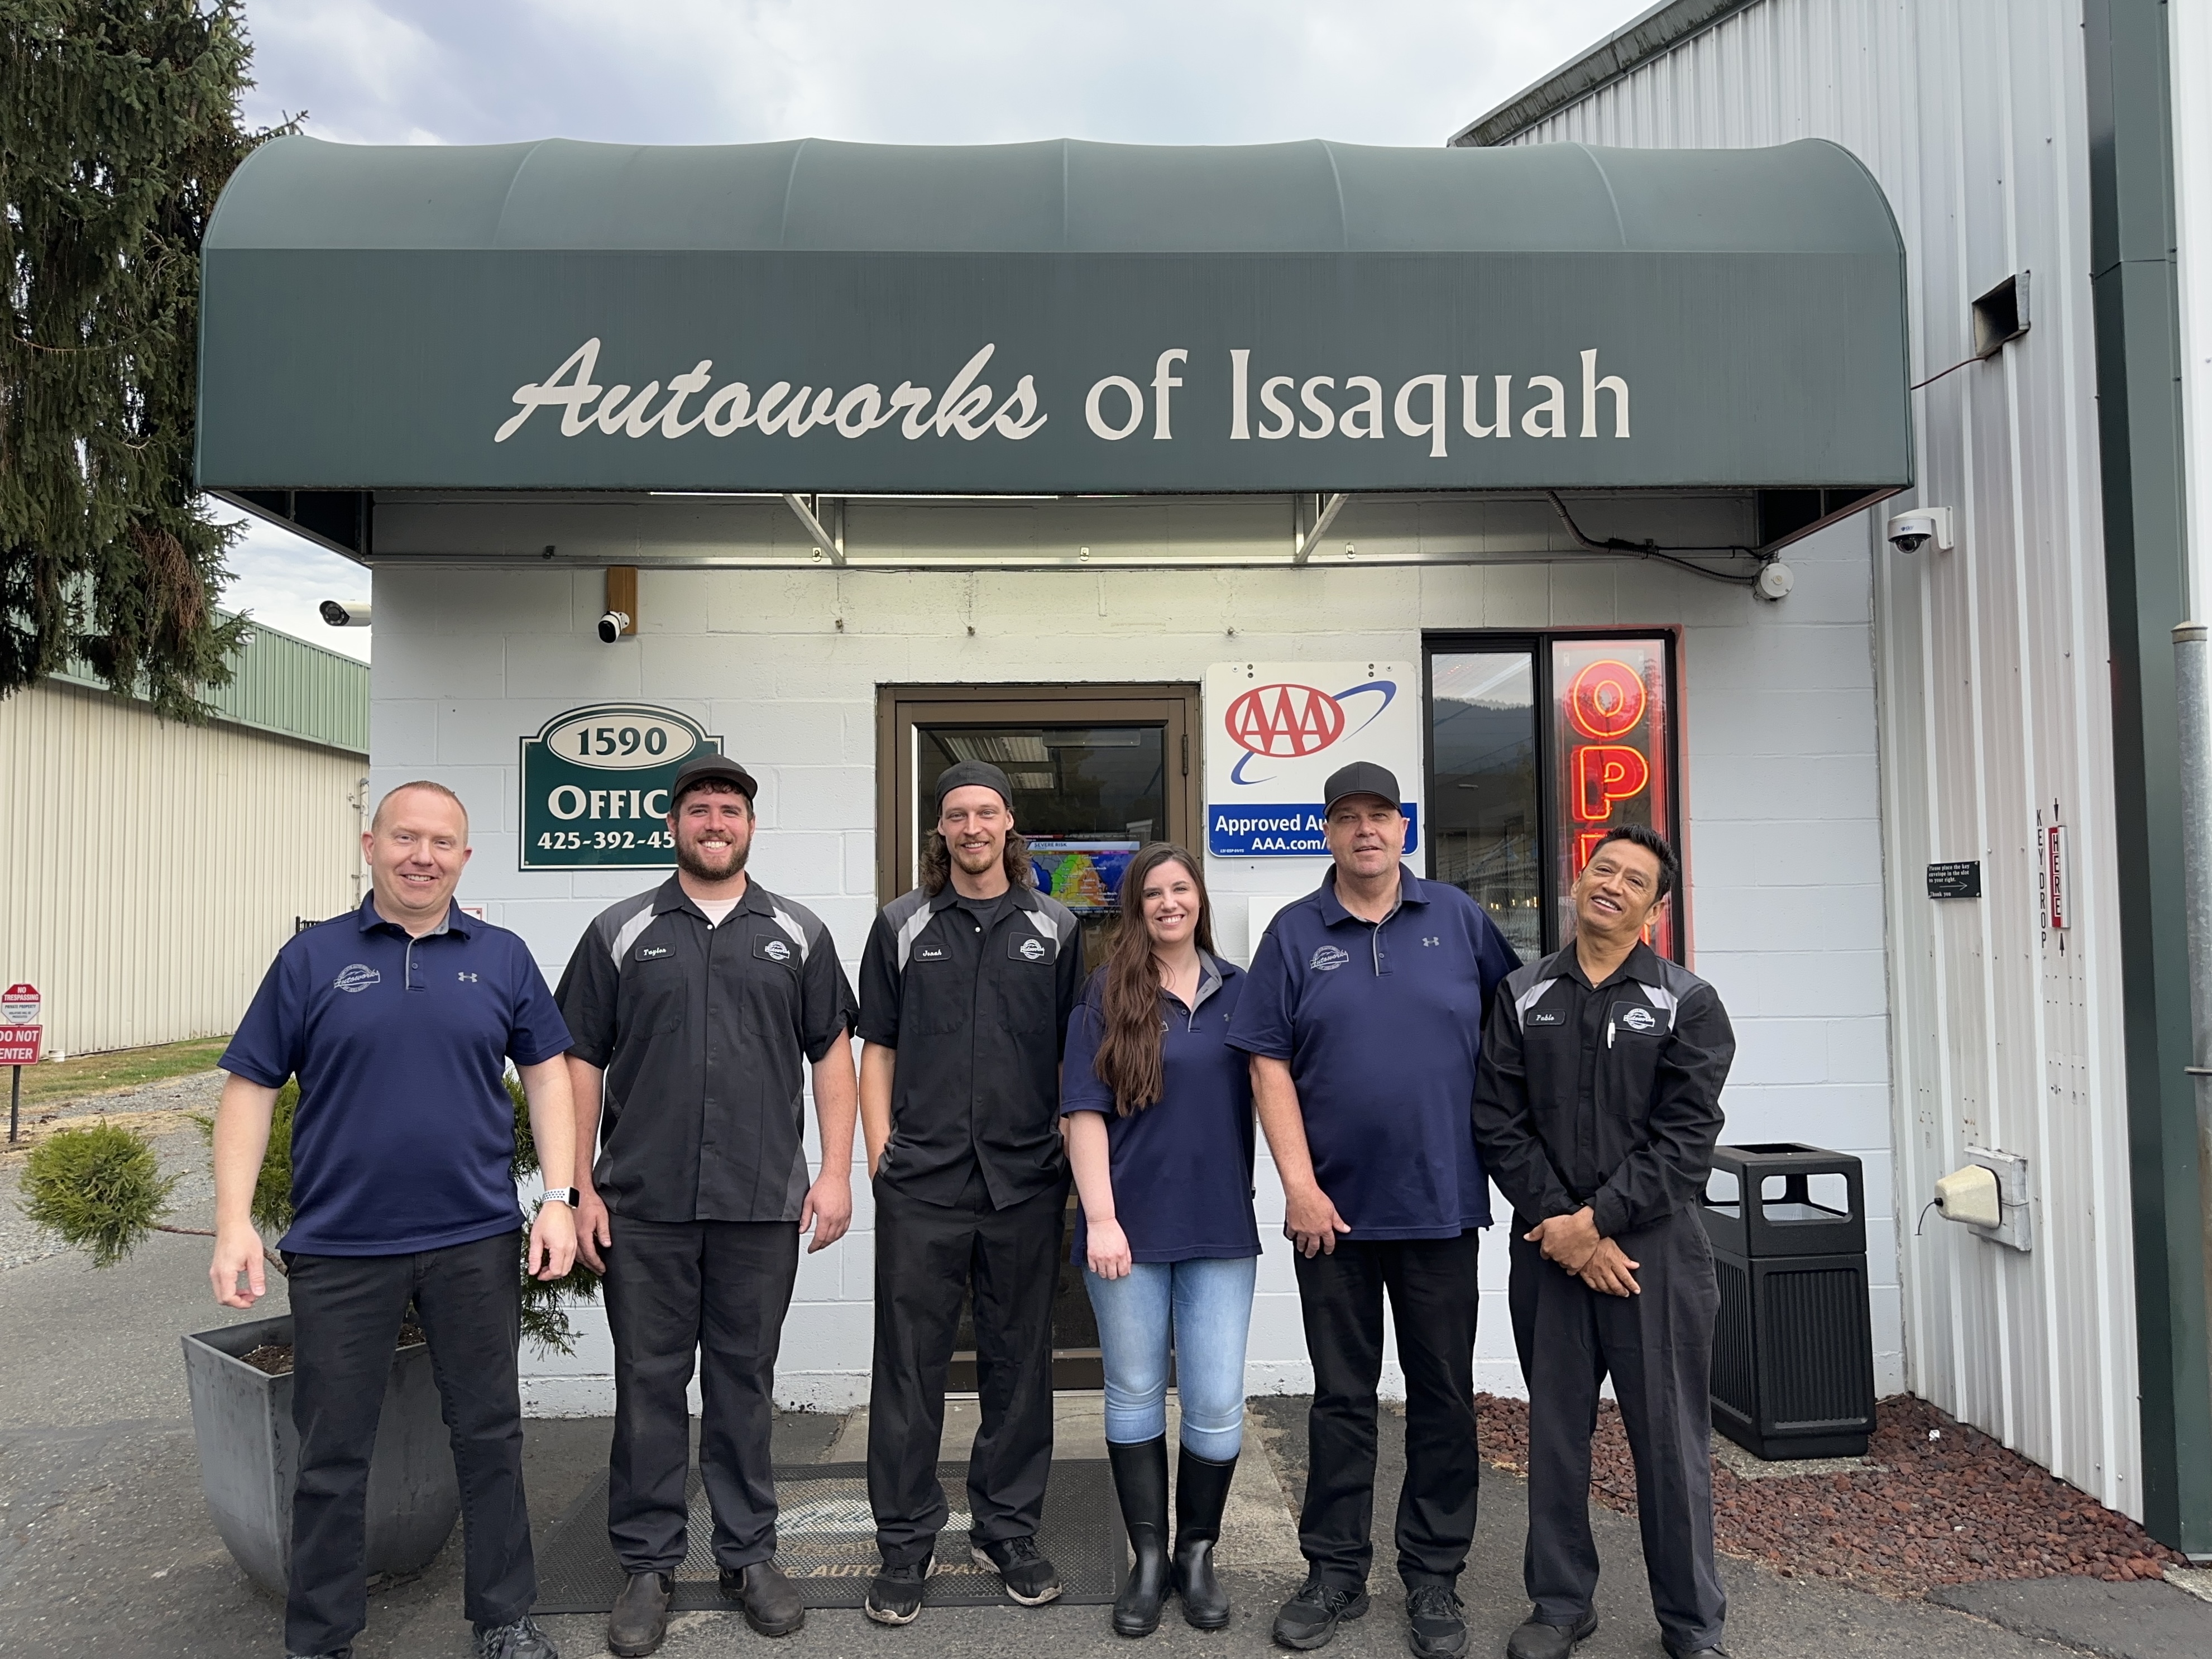 Our Team - Autoworks Of Issaquah